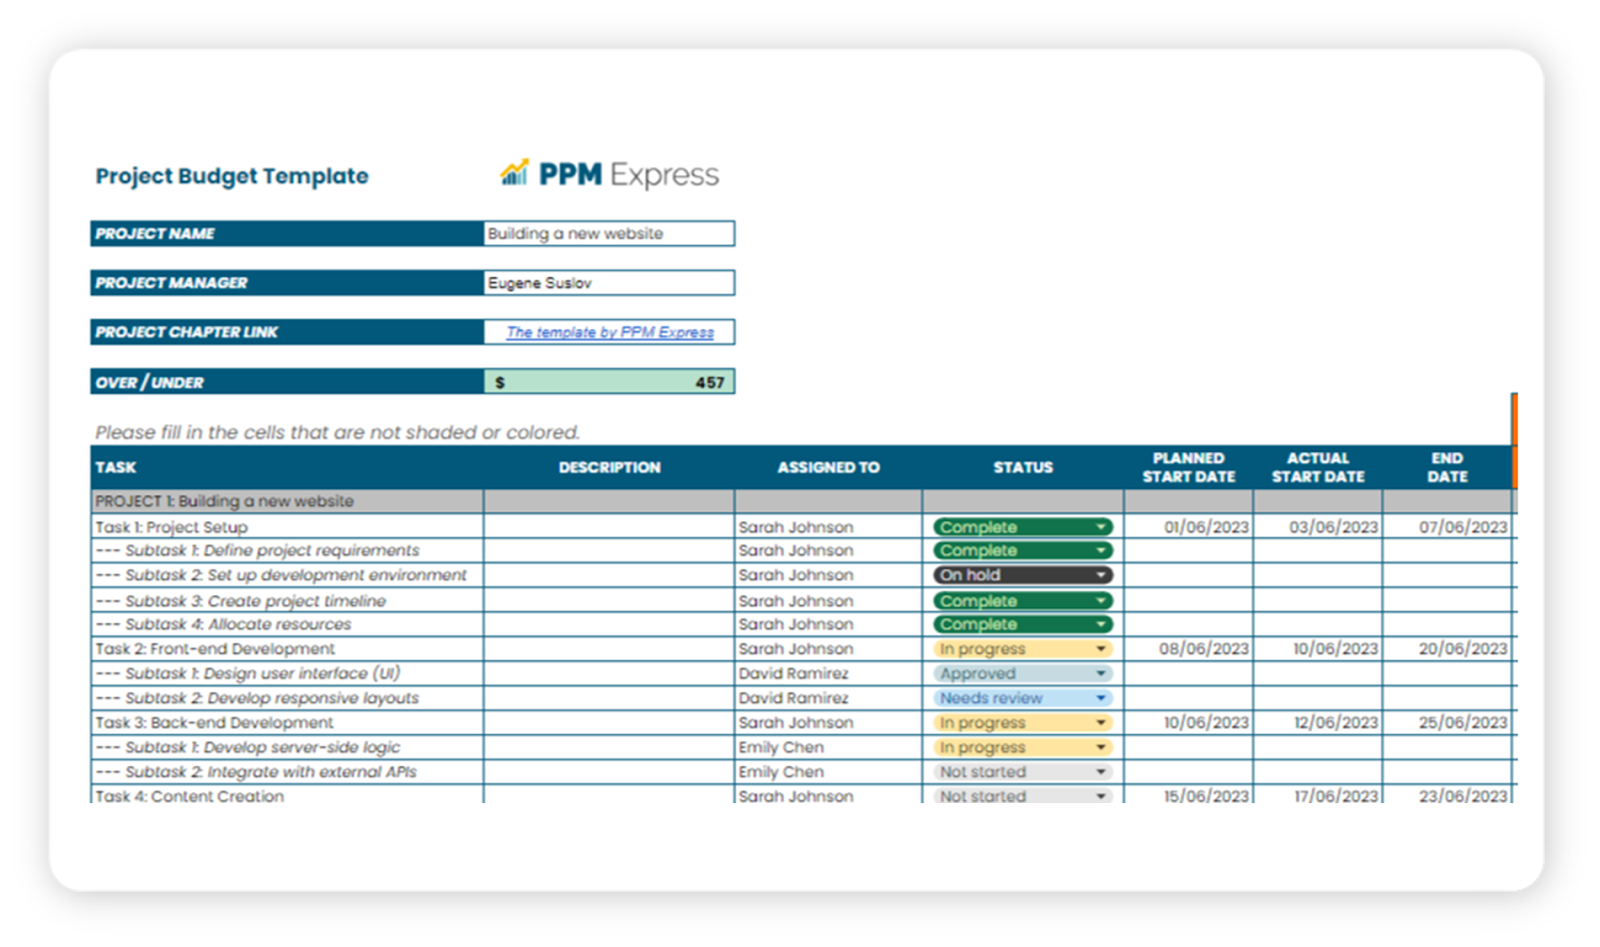 Project budget template download for free by PPM Express